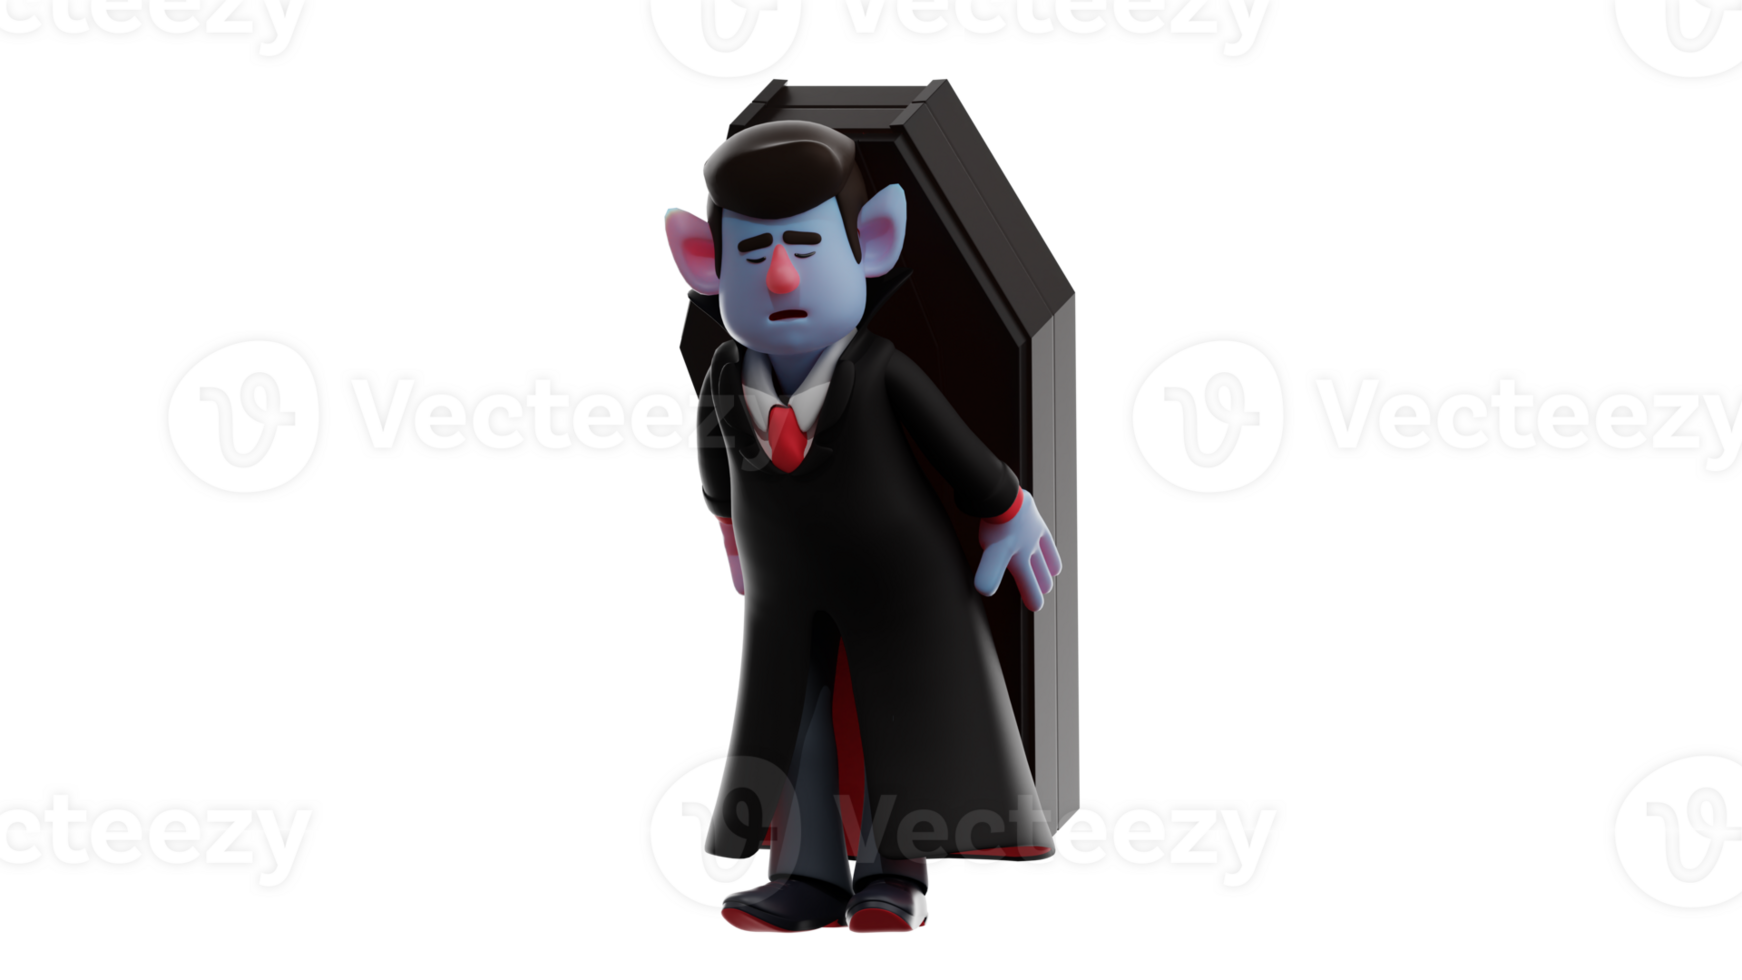 3D Illustration. Tired Dracula 3D cartoon character. Dracula lifted the coffin on his back. Dracula shows the expression of fatigue. Exhausted vampire. 3D cartoon character png